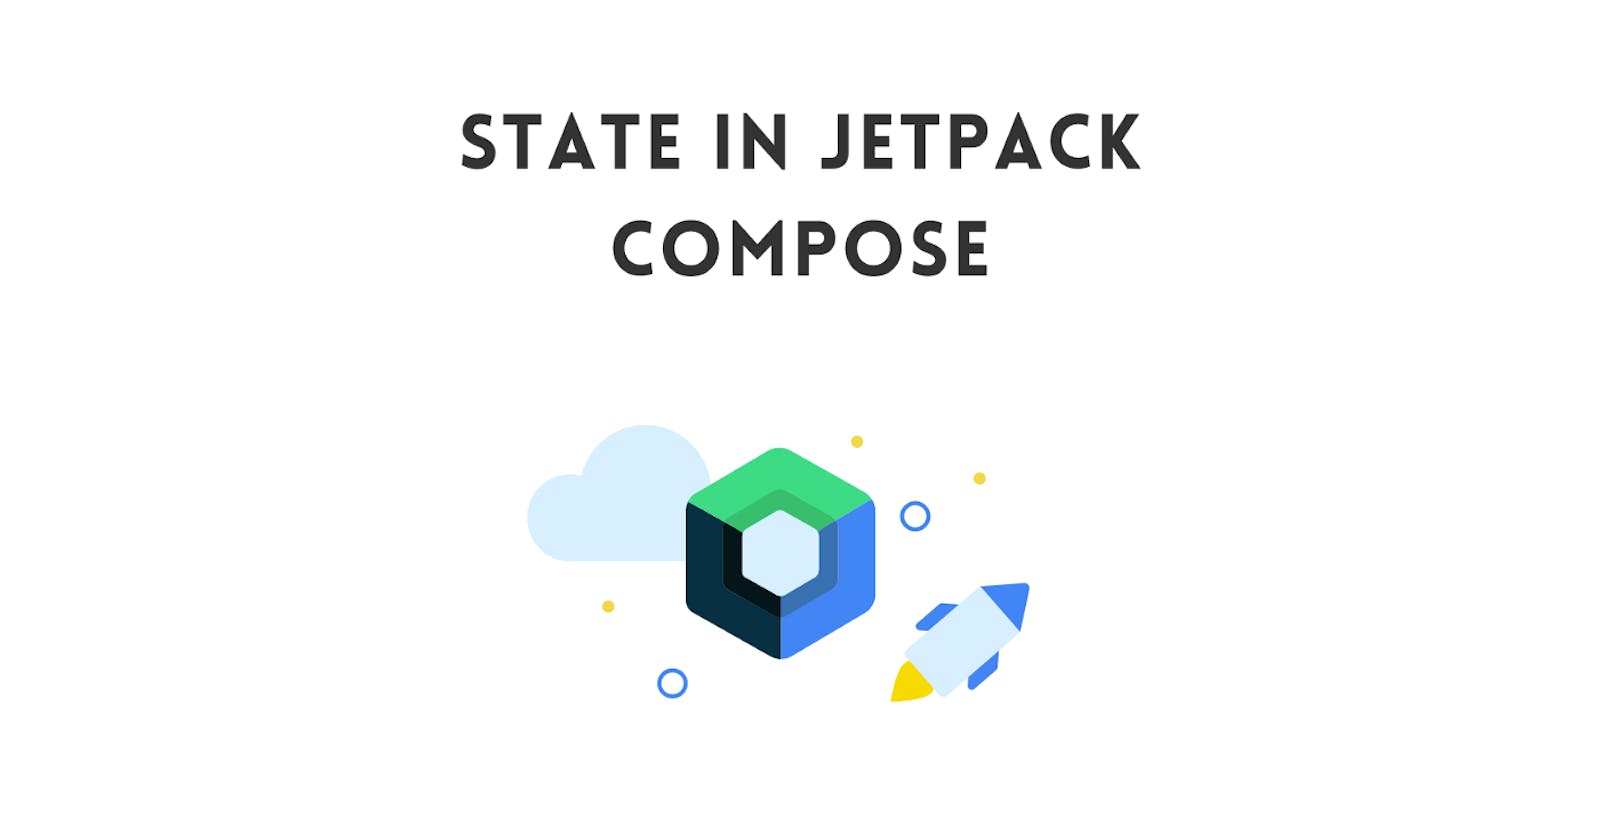 States in Jetpack Compose